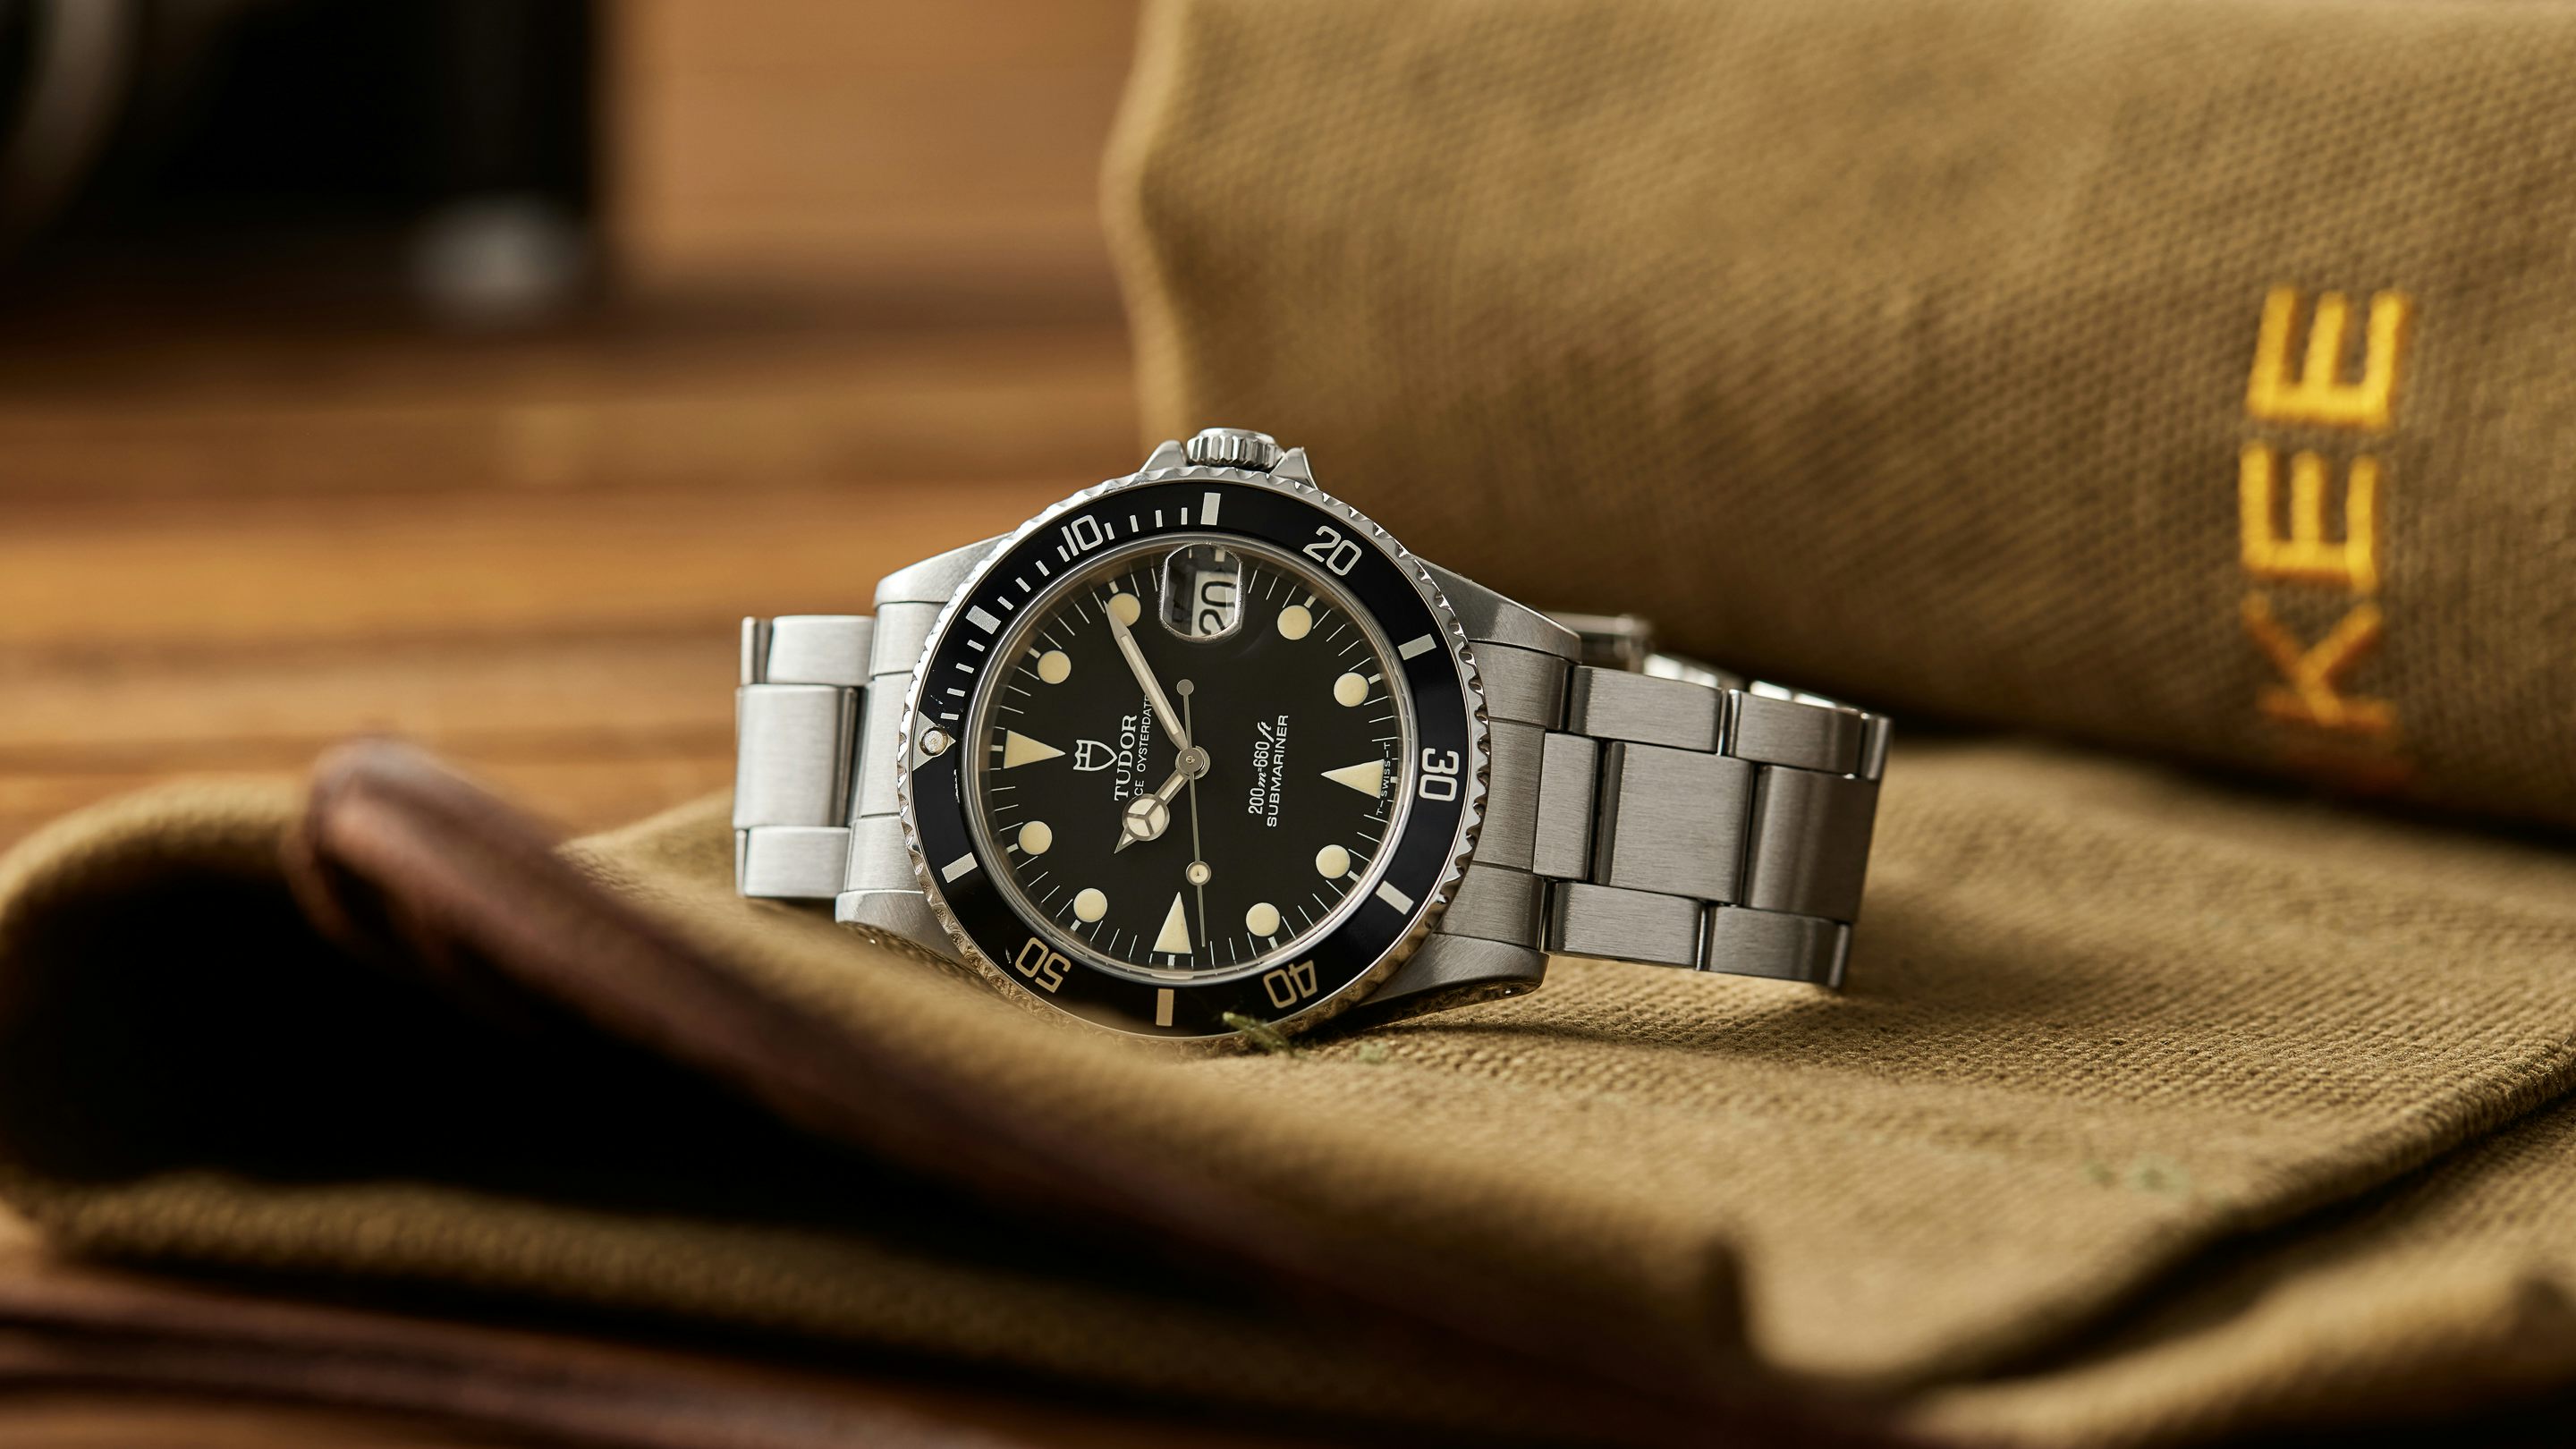 Hodinkee Pre-Owned Picks: A 36mm Tudor Submariner, A Green Dial Rolex  Day-Date 40, And A Universal Genève Aero-Compax In Yellow Gold